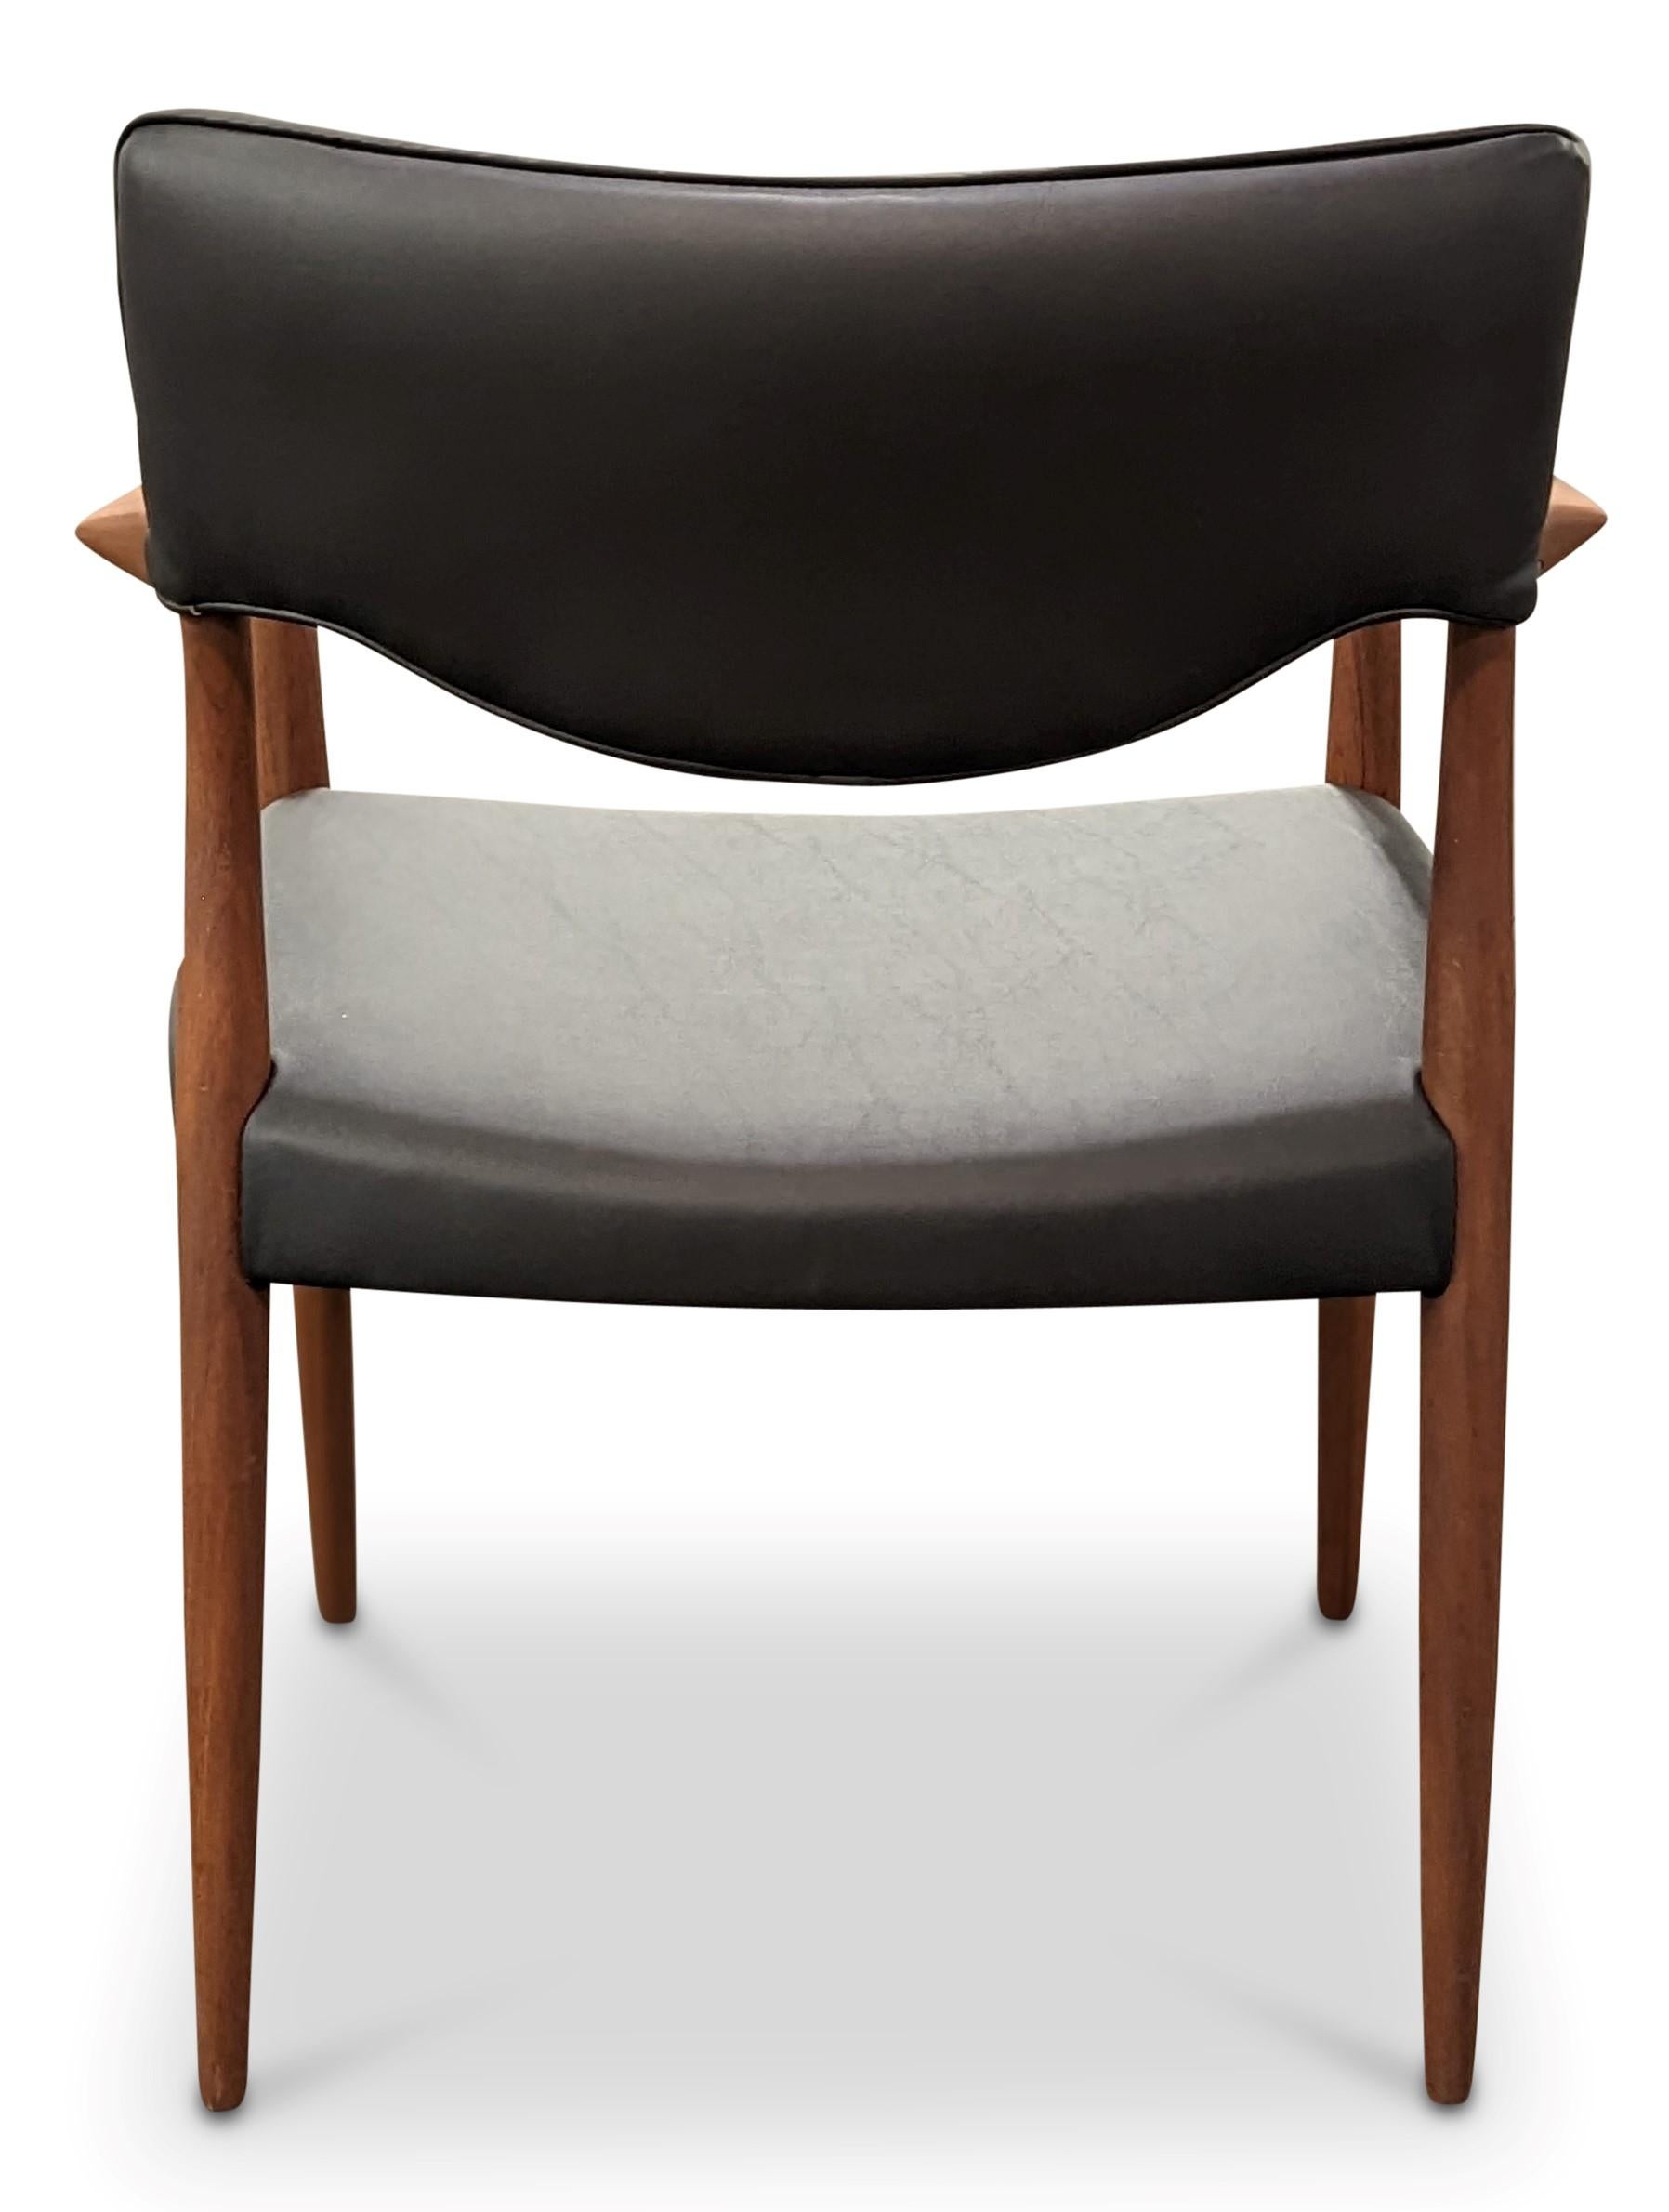 Vintage Danish mid-century modern, made in the 1950's - Recently refurbished

Dimensions 31